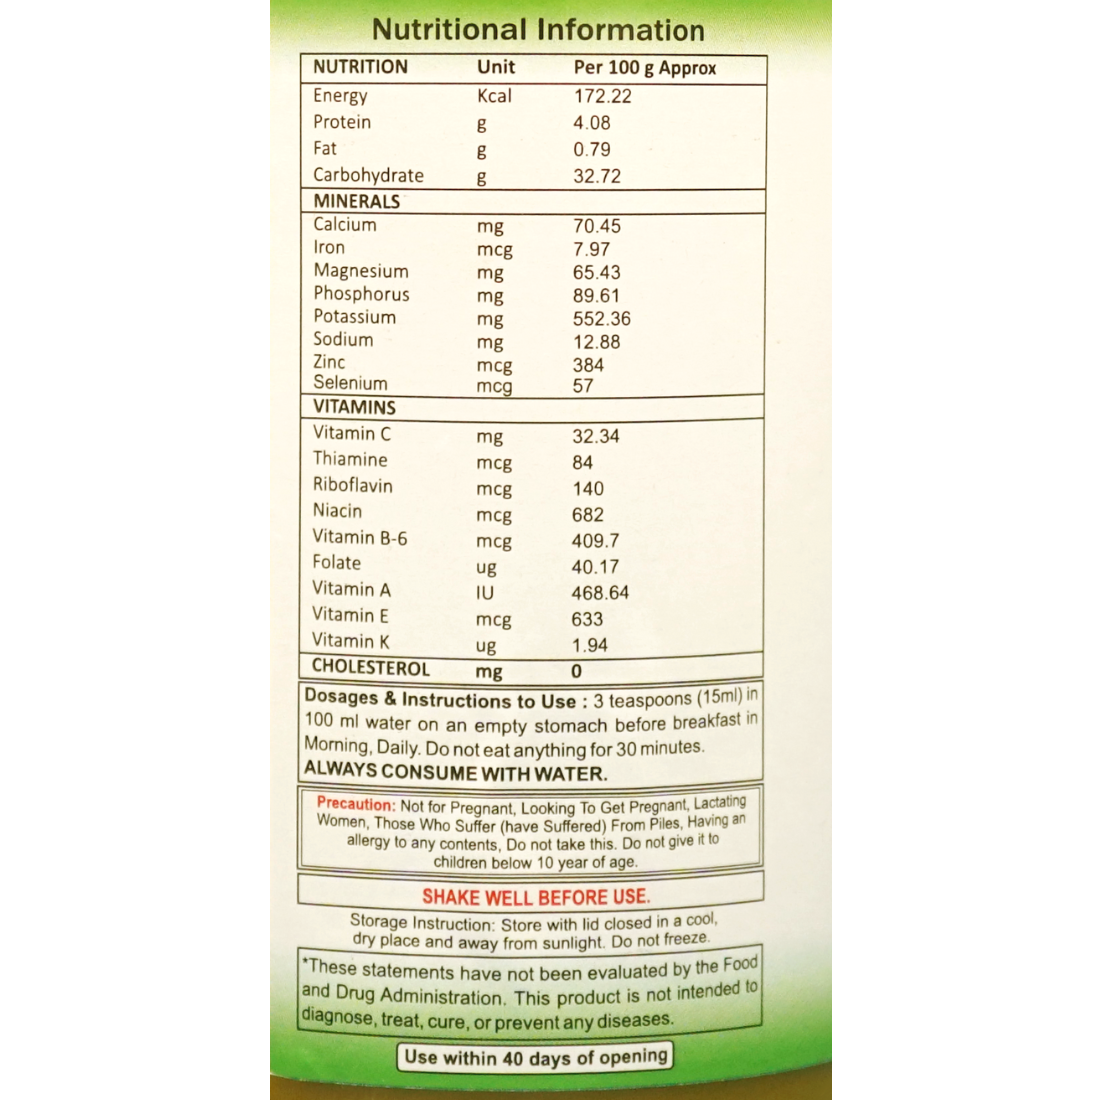 Liver Syrup contents and nutrition